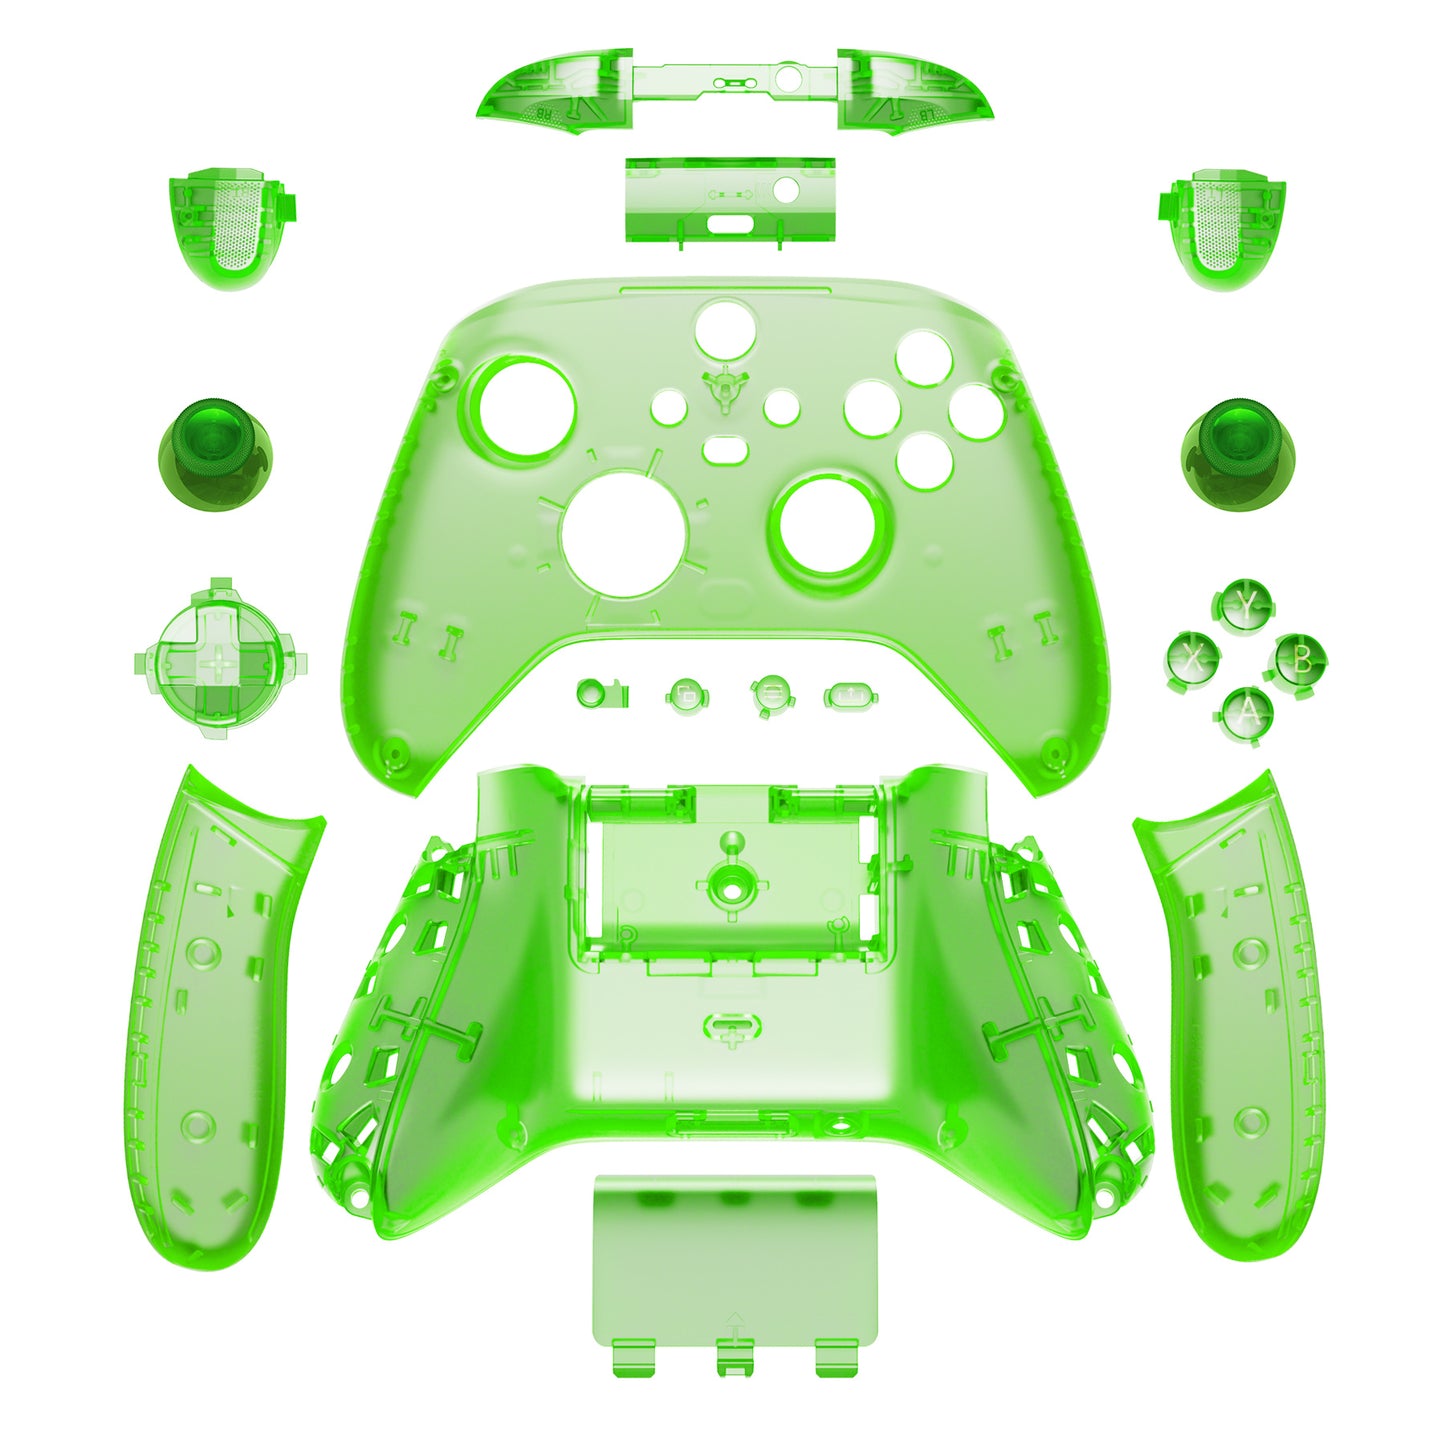 eXtremeRate Full Set Housing Shell Case with Buttons for Xbox Series X & S Controller - Transparent Green eXtremeRate